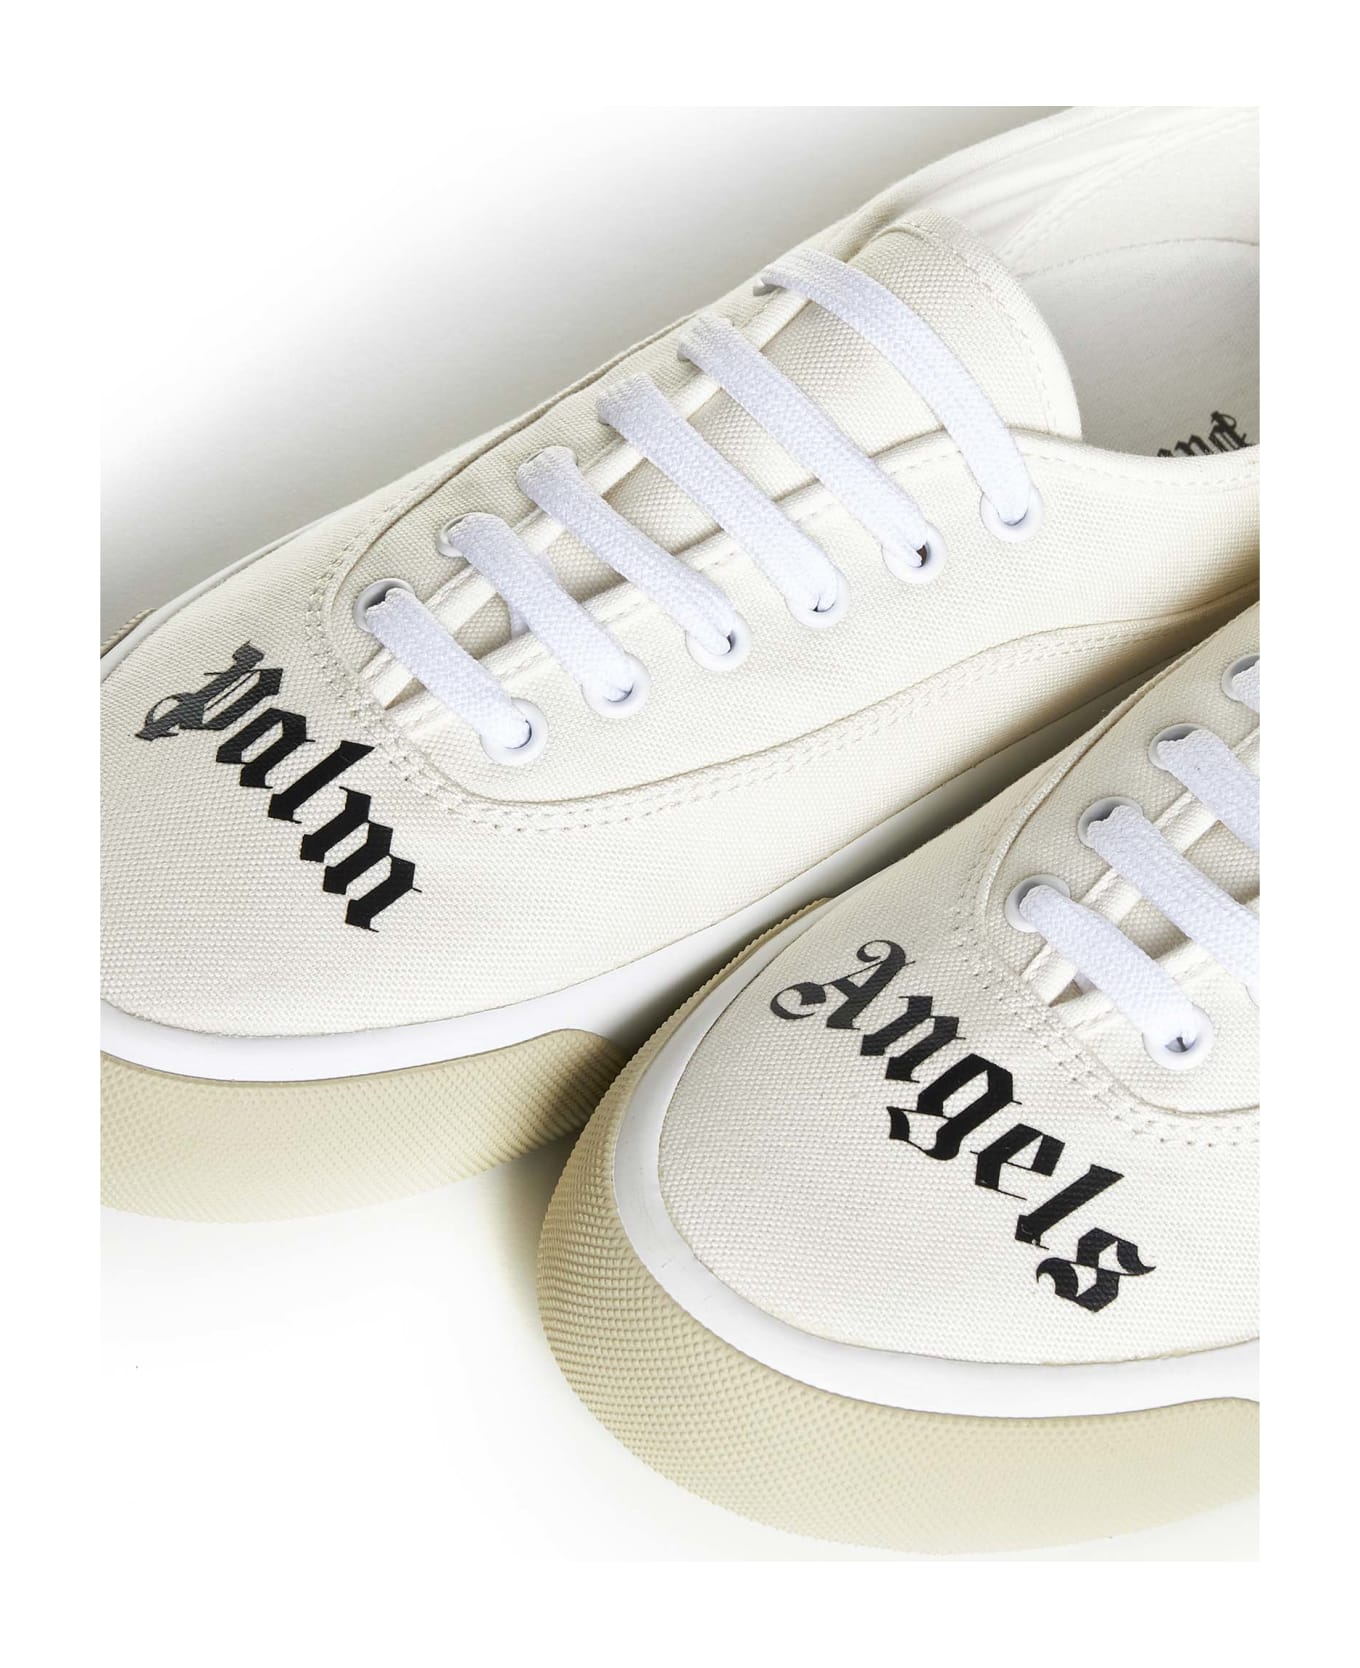 Palm Angels Skater Low Sneakers - Cream white